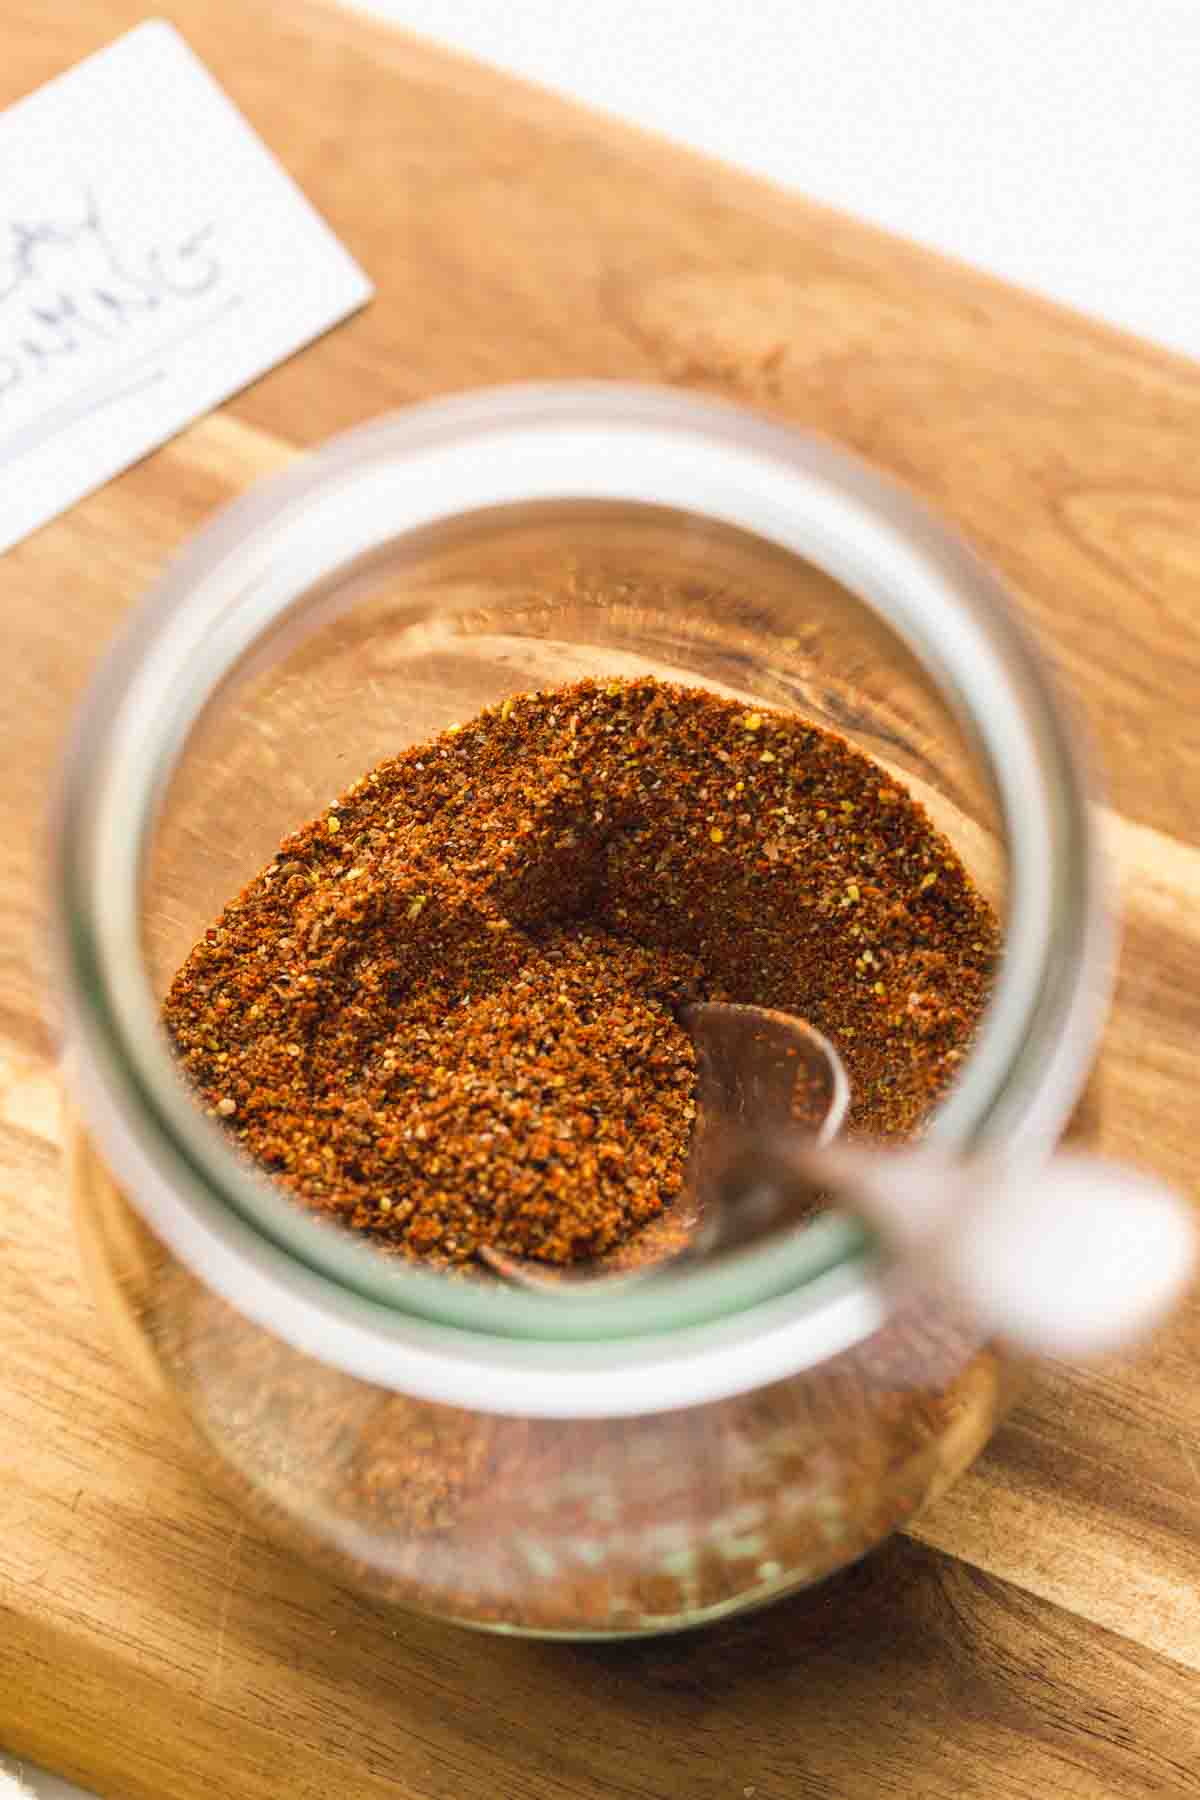 Old bay seasoning blend in a small glass jar